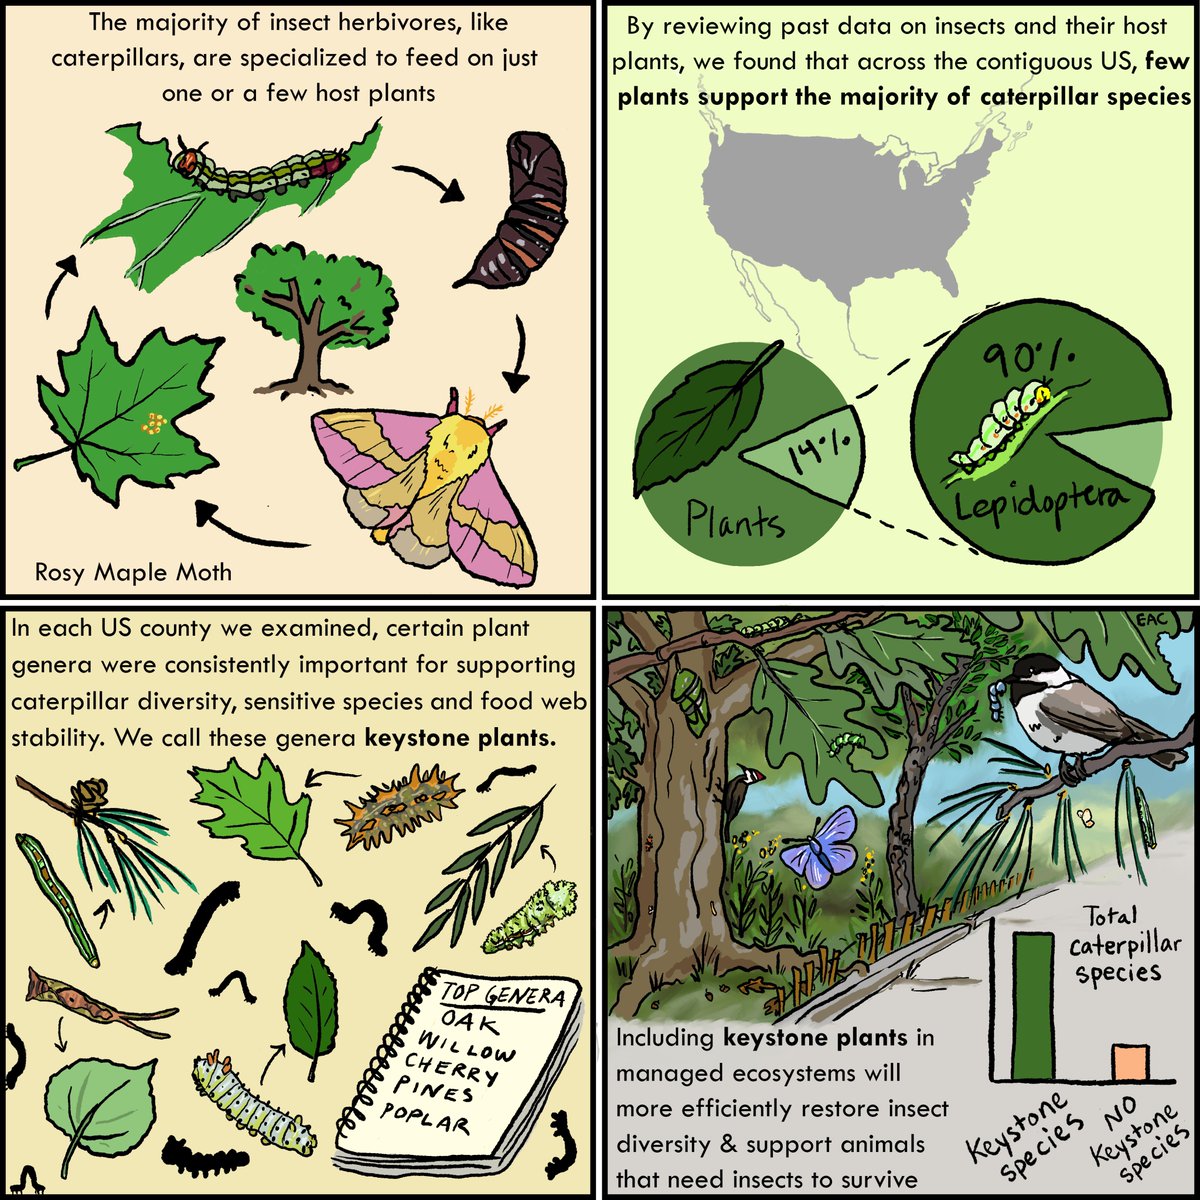 Here's the whole comic, feel free to share! & link to the OA paper. We hope this sparks new conversations about the nuance & importance of plant species identity even among  #nativeplants, and is also helpful for anyone doing on-the-ground restoration.  https://www.nature.com/articles/s41467-020-19565-4